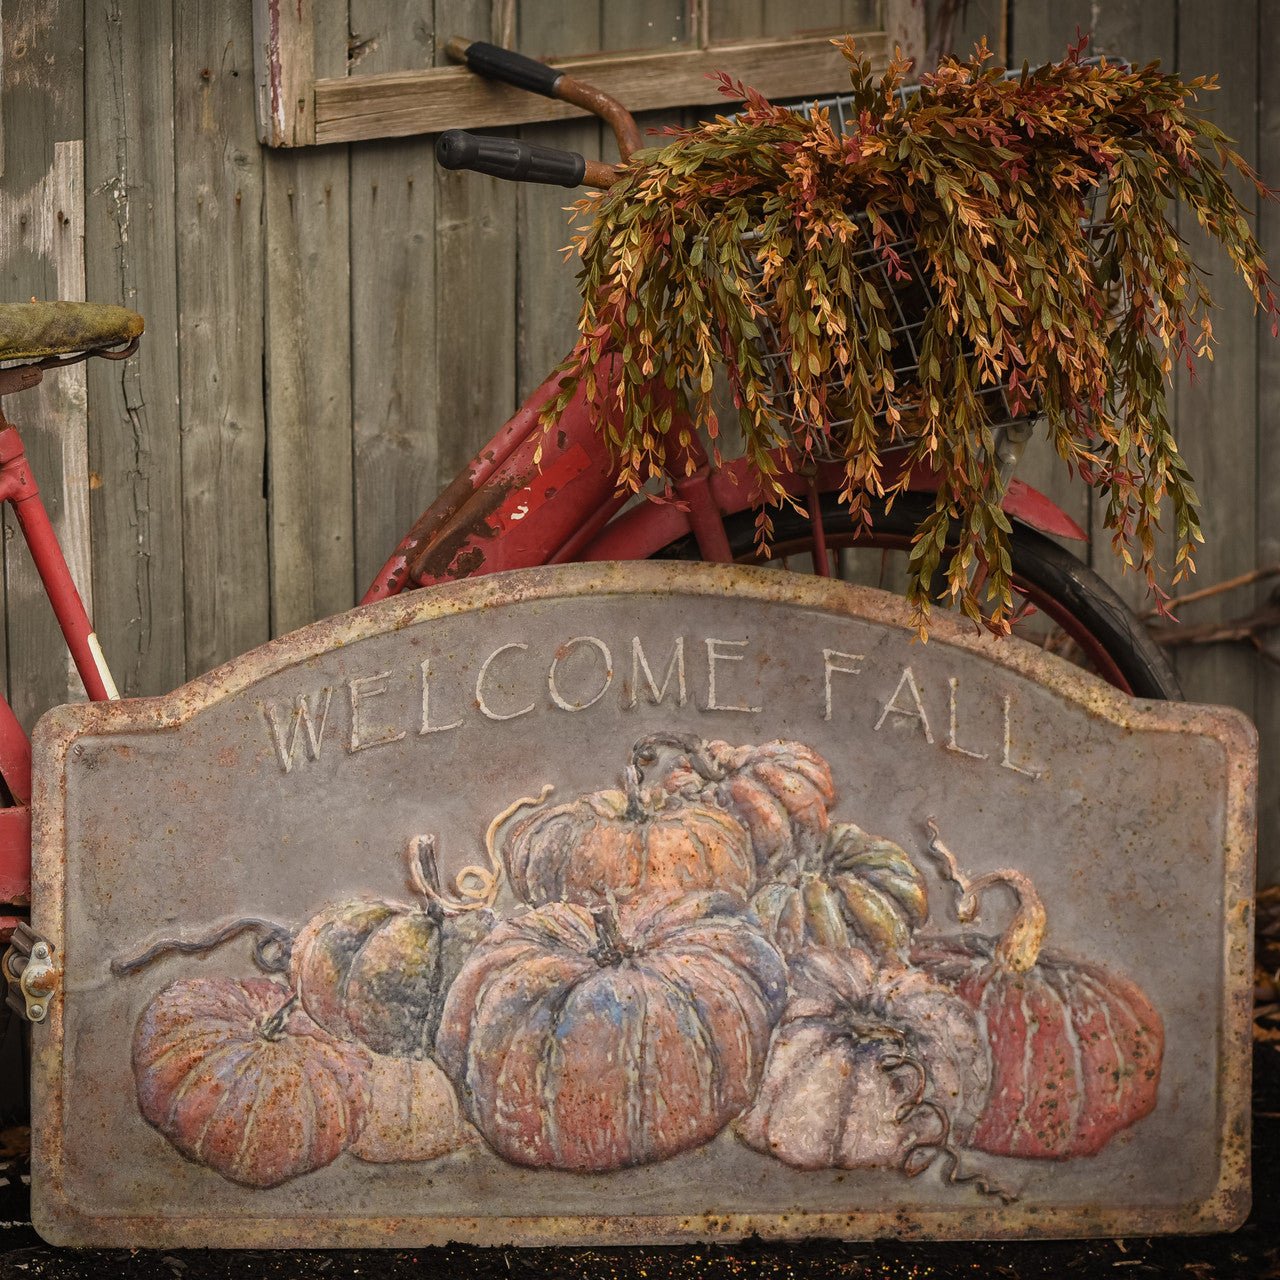 Ragon House Autumn Welcome Fall Distressed Metal Sign L 43” x 24” H - The Primitive Pineapple Collection